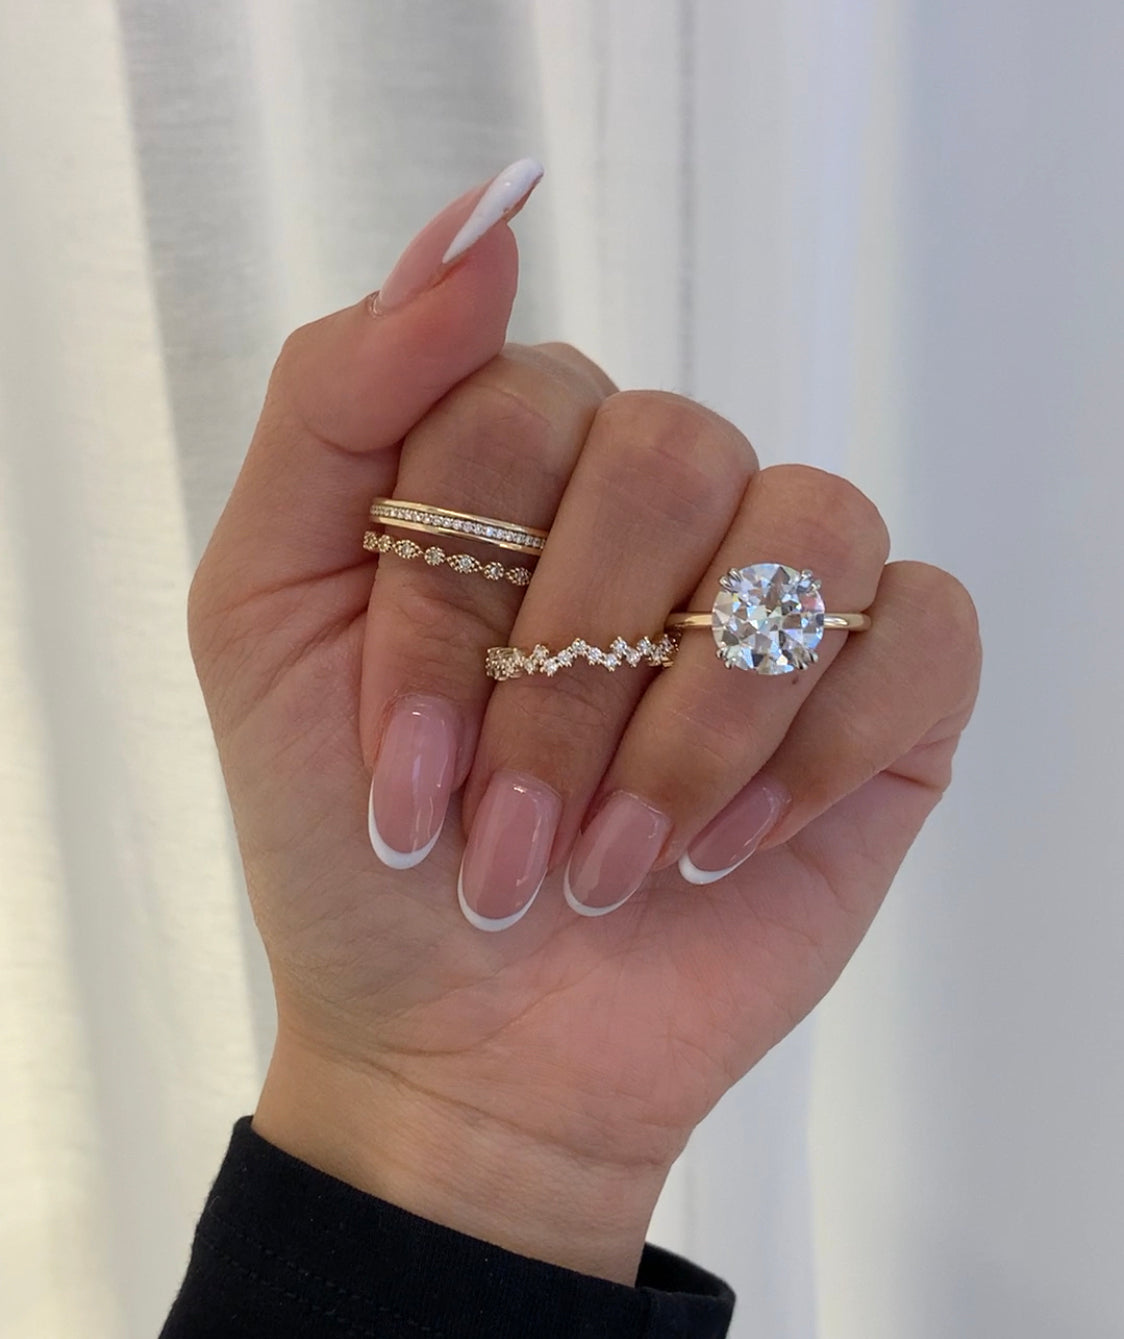 Karat vs. Carat – What's The Difference?